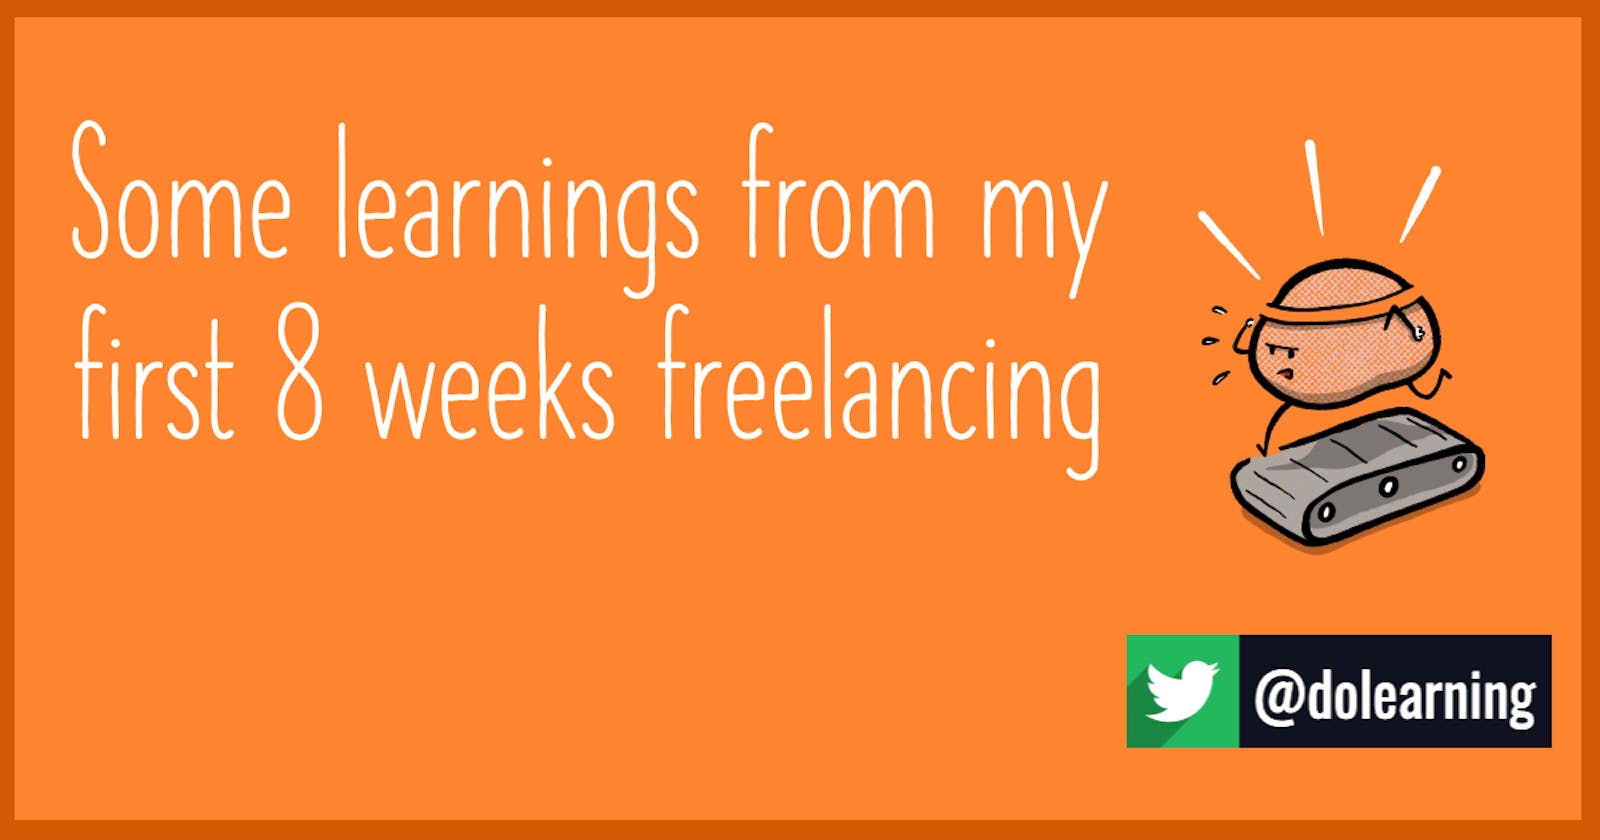 Some learnings from my first 8 weeks freelancing